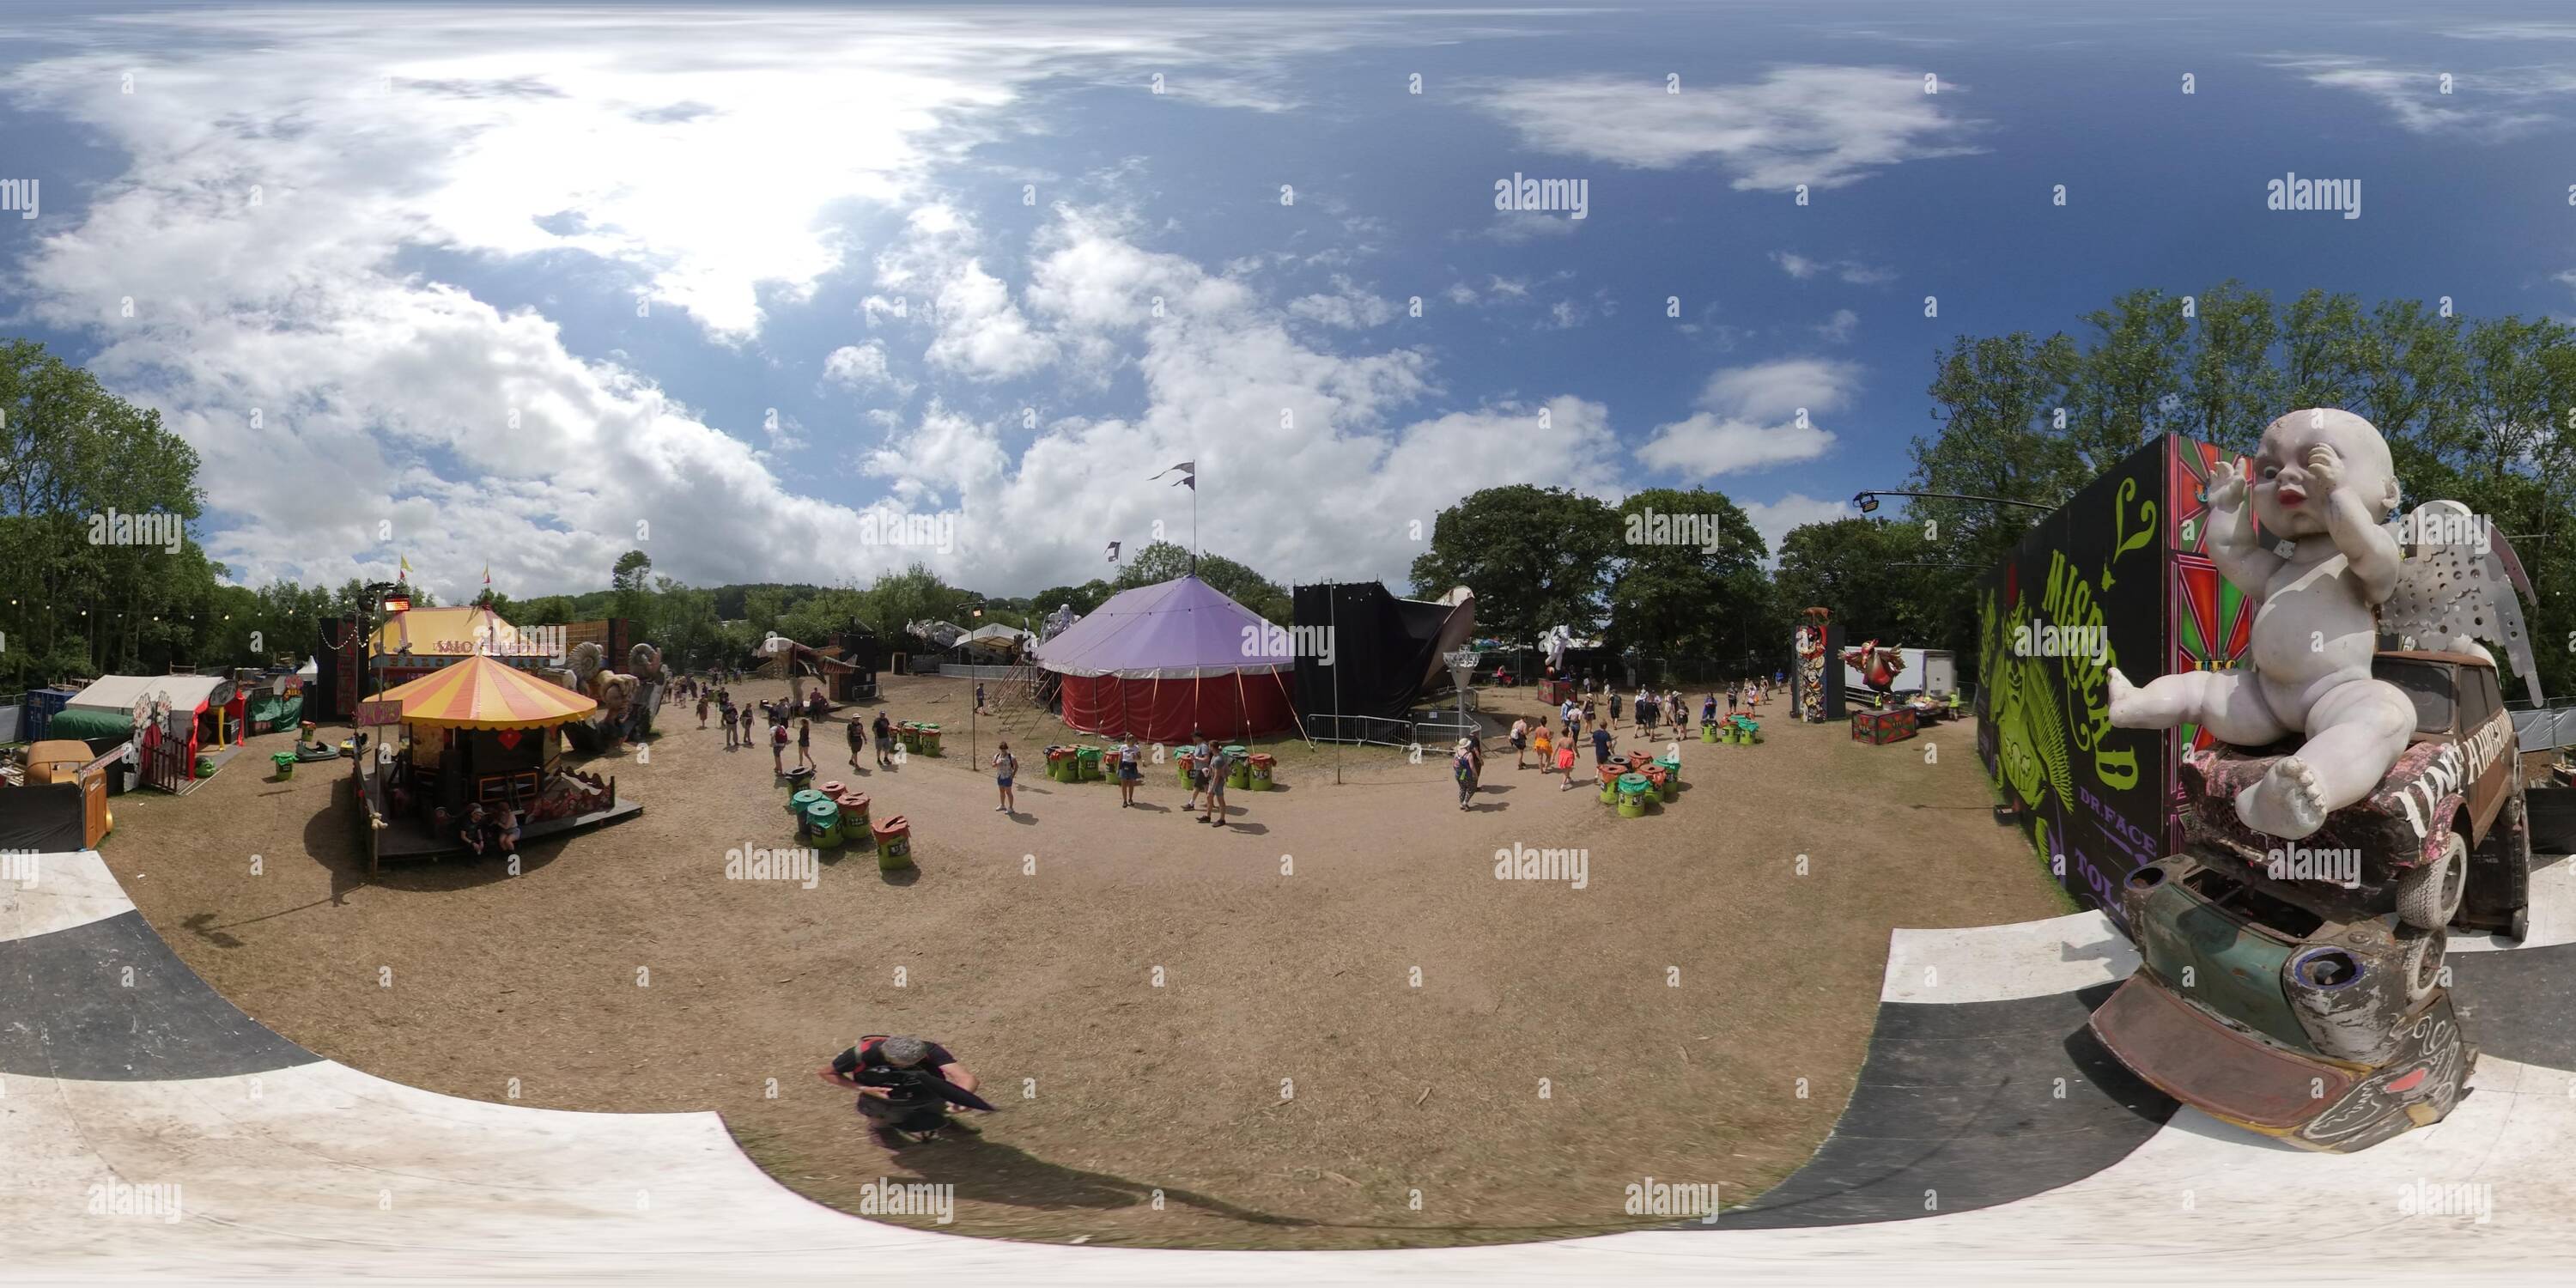 360 degree panoramic view of 360° View The Unfairground at Glastonbury Festival 2019